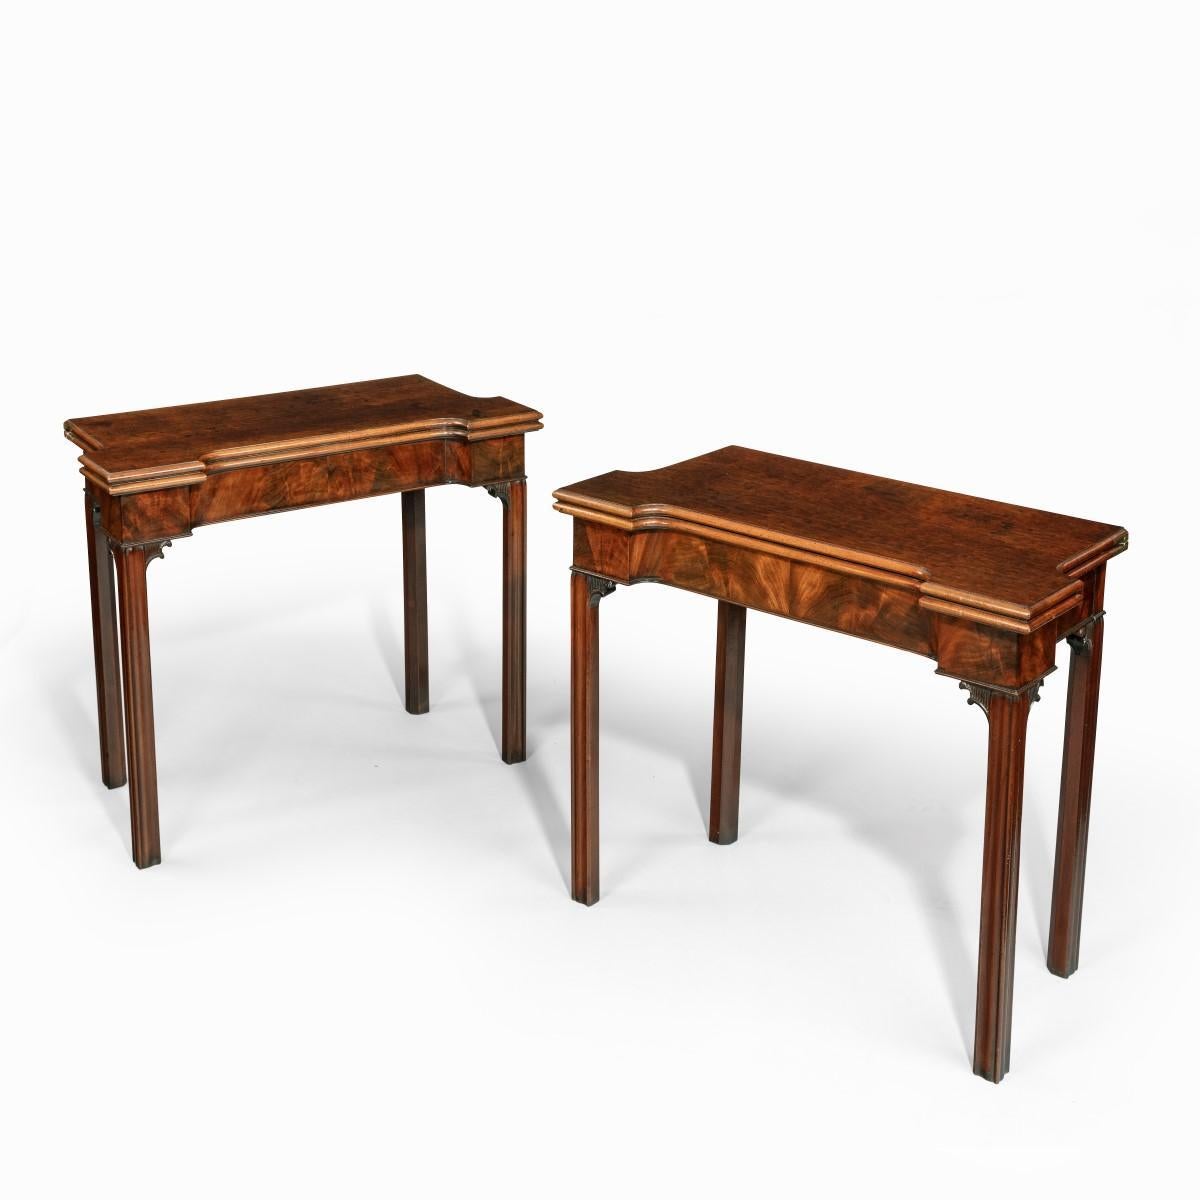 A very fine pair of George III mahogany and plum pudding mahogany concertina action card tables, each with square cut corners and recessed sides, the hinged tops opening to reveal a baize lined interior with counter recesses and candle stands, one